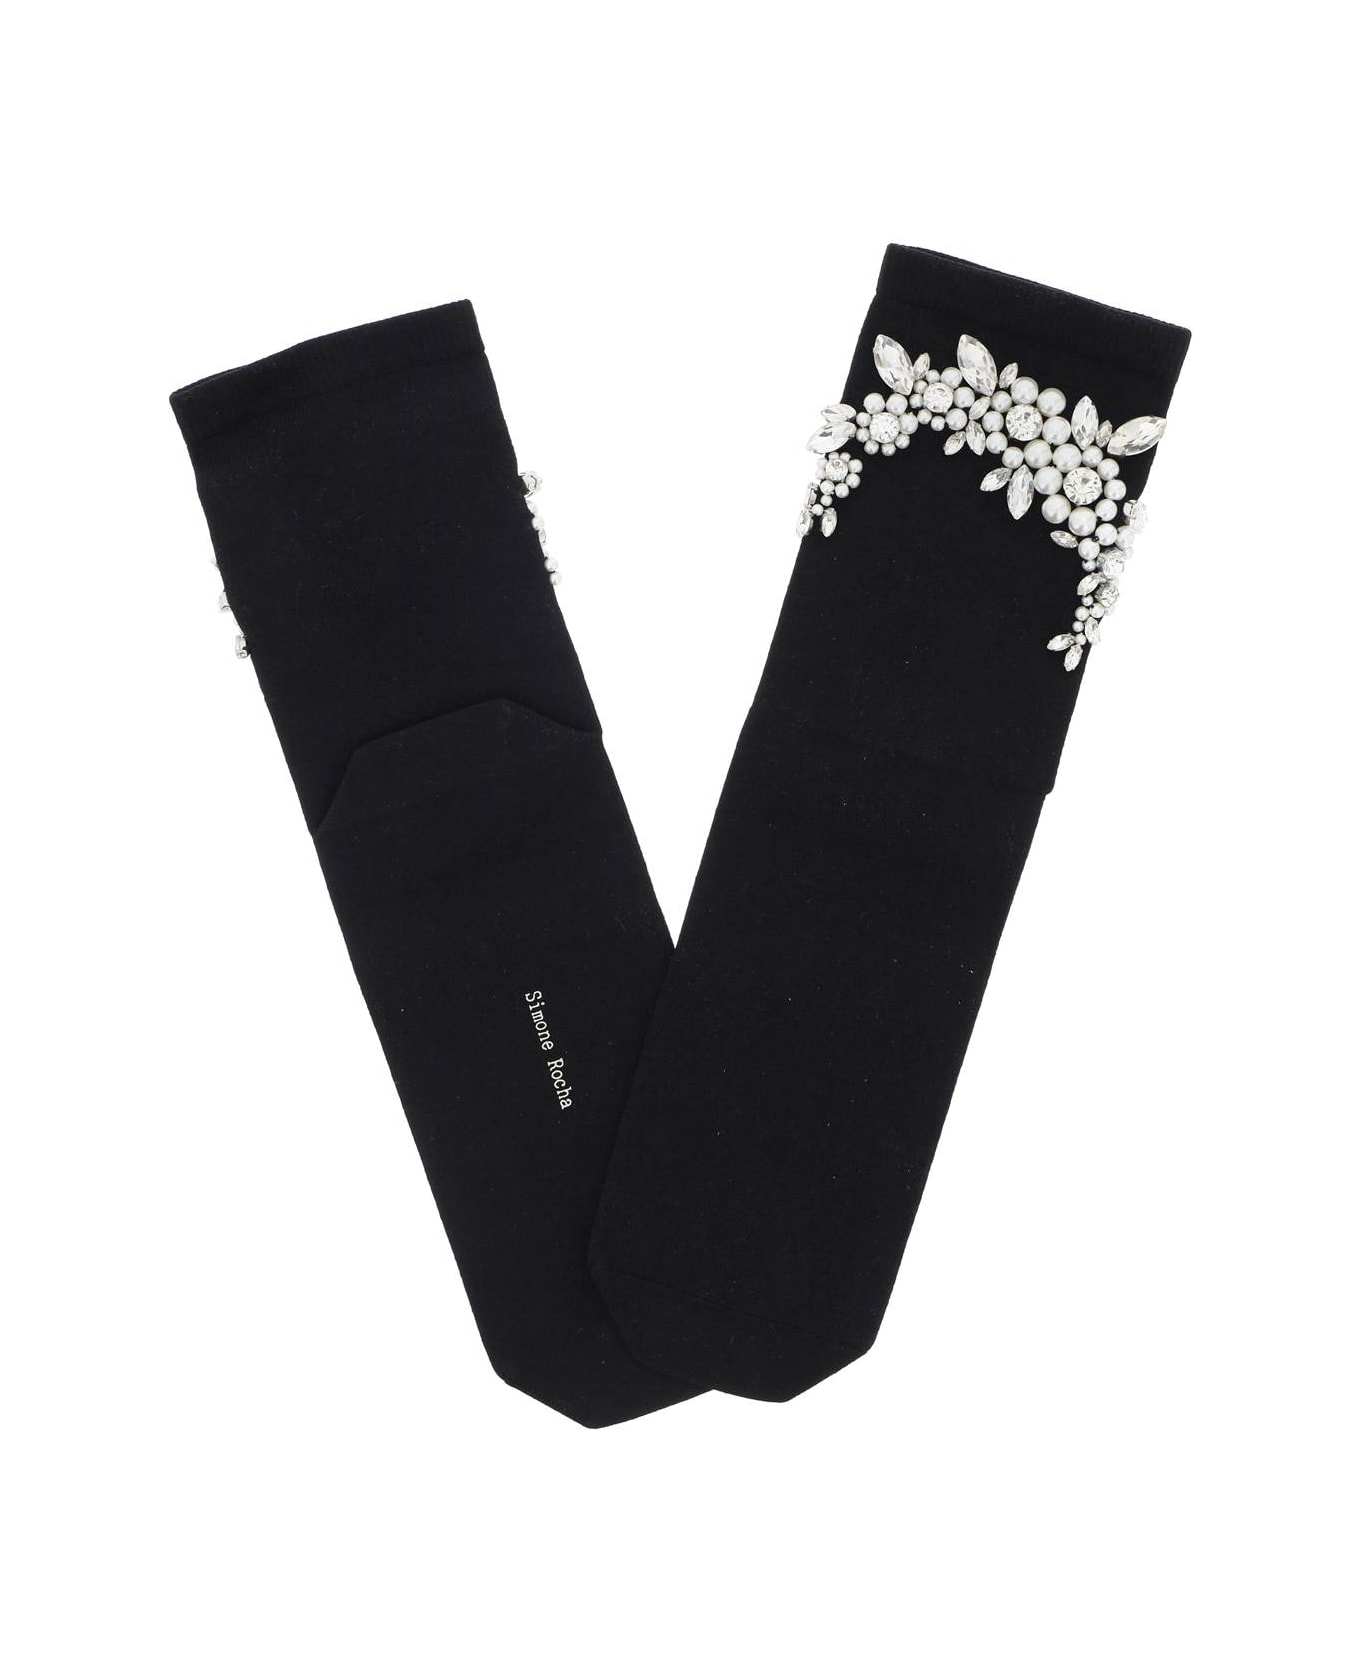 Simone Rocha Socks With Pearls And Crystals - BLACK PEARL CLEAR (Black)